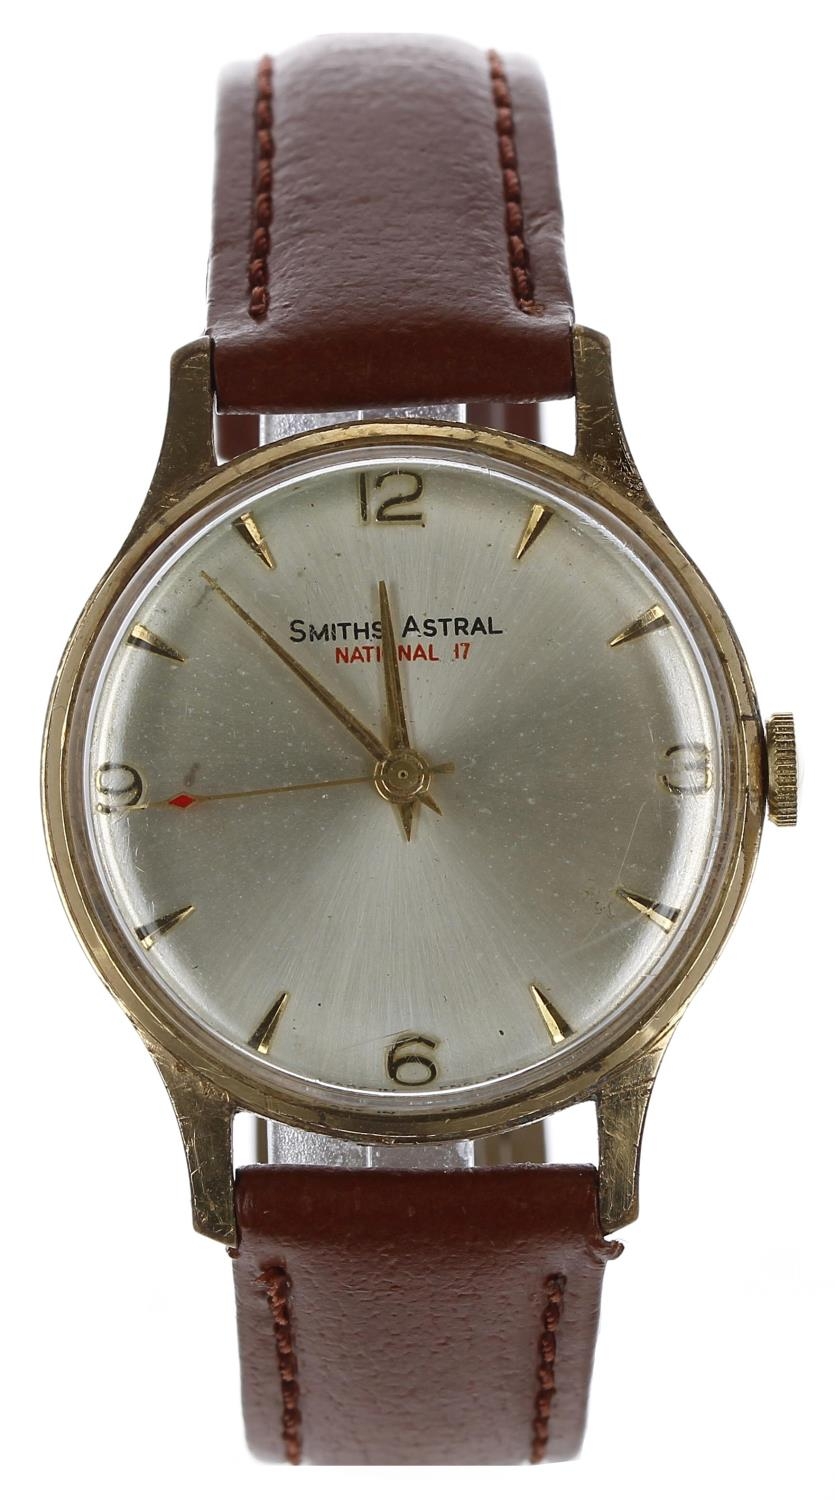 Smiths Astral National 17 gold plated and stainless steel gentleman's wristwatch, circular